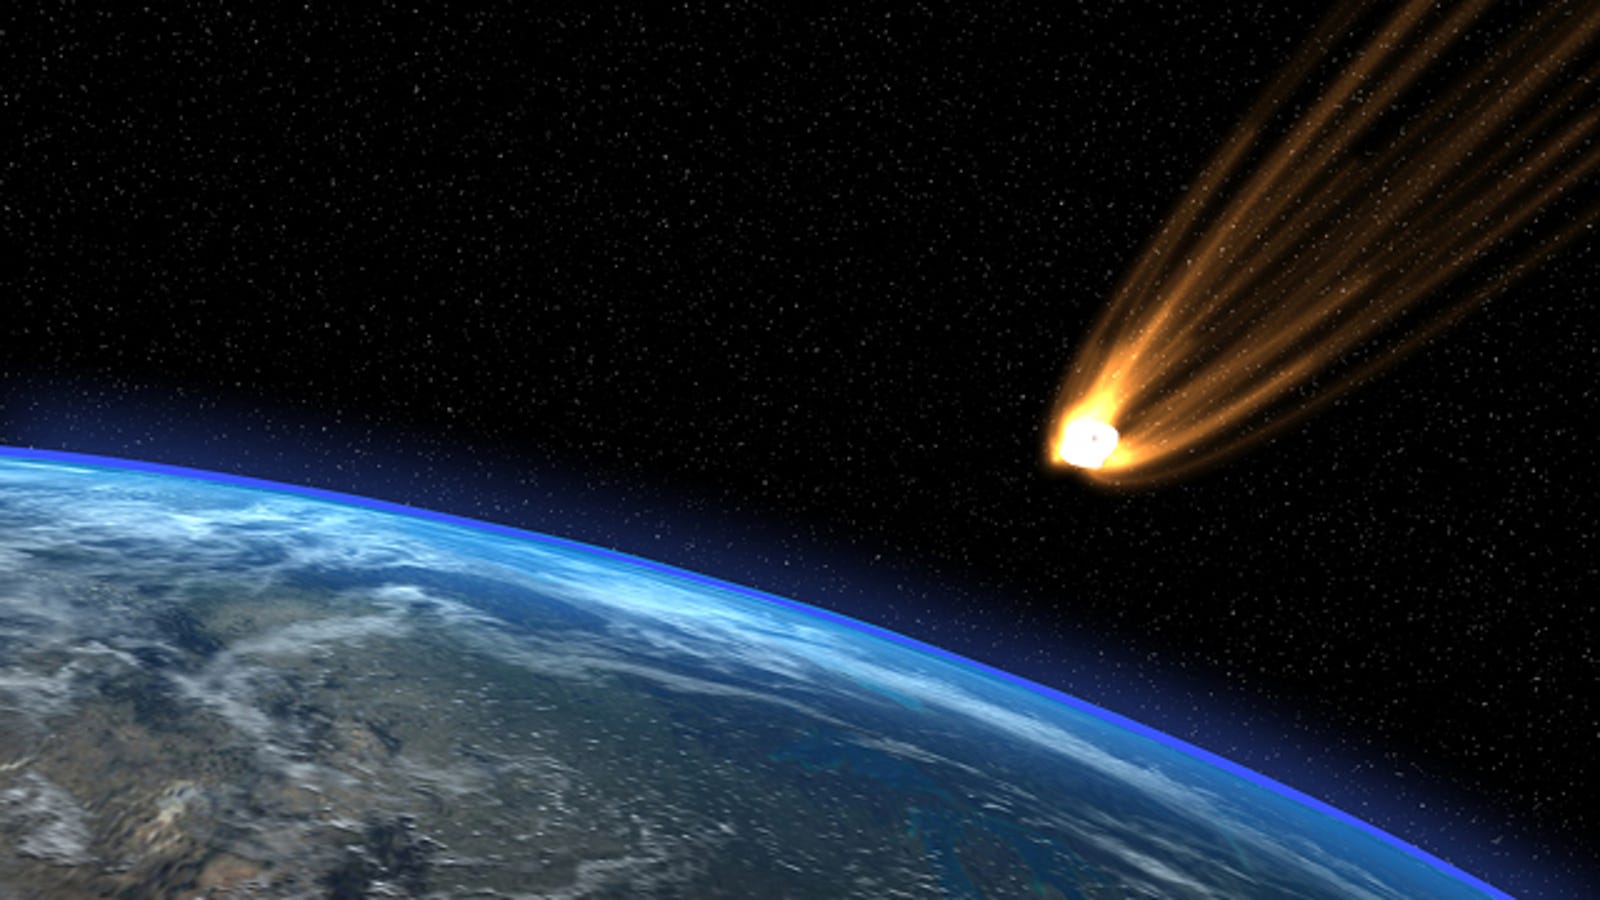 How serious does an asteroid threat have to be before we take action?